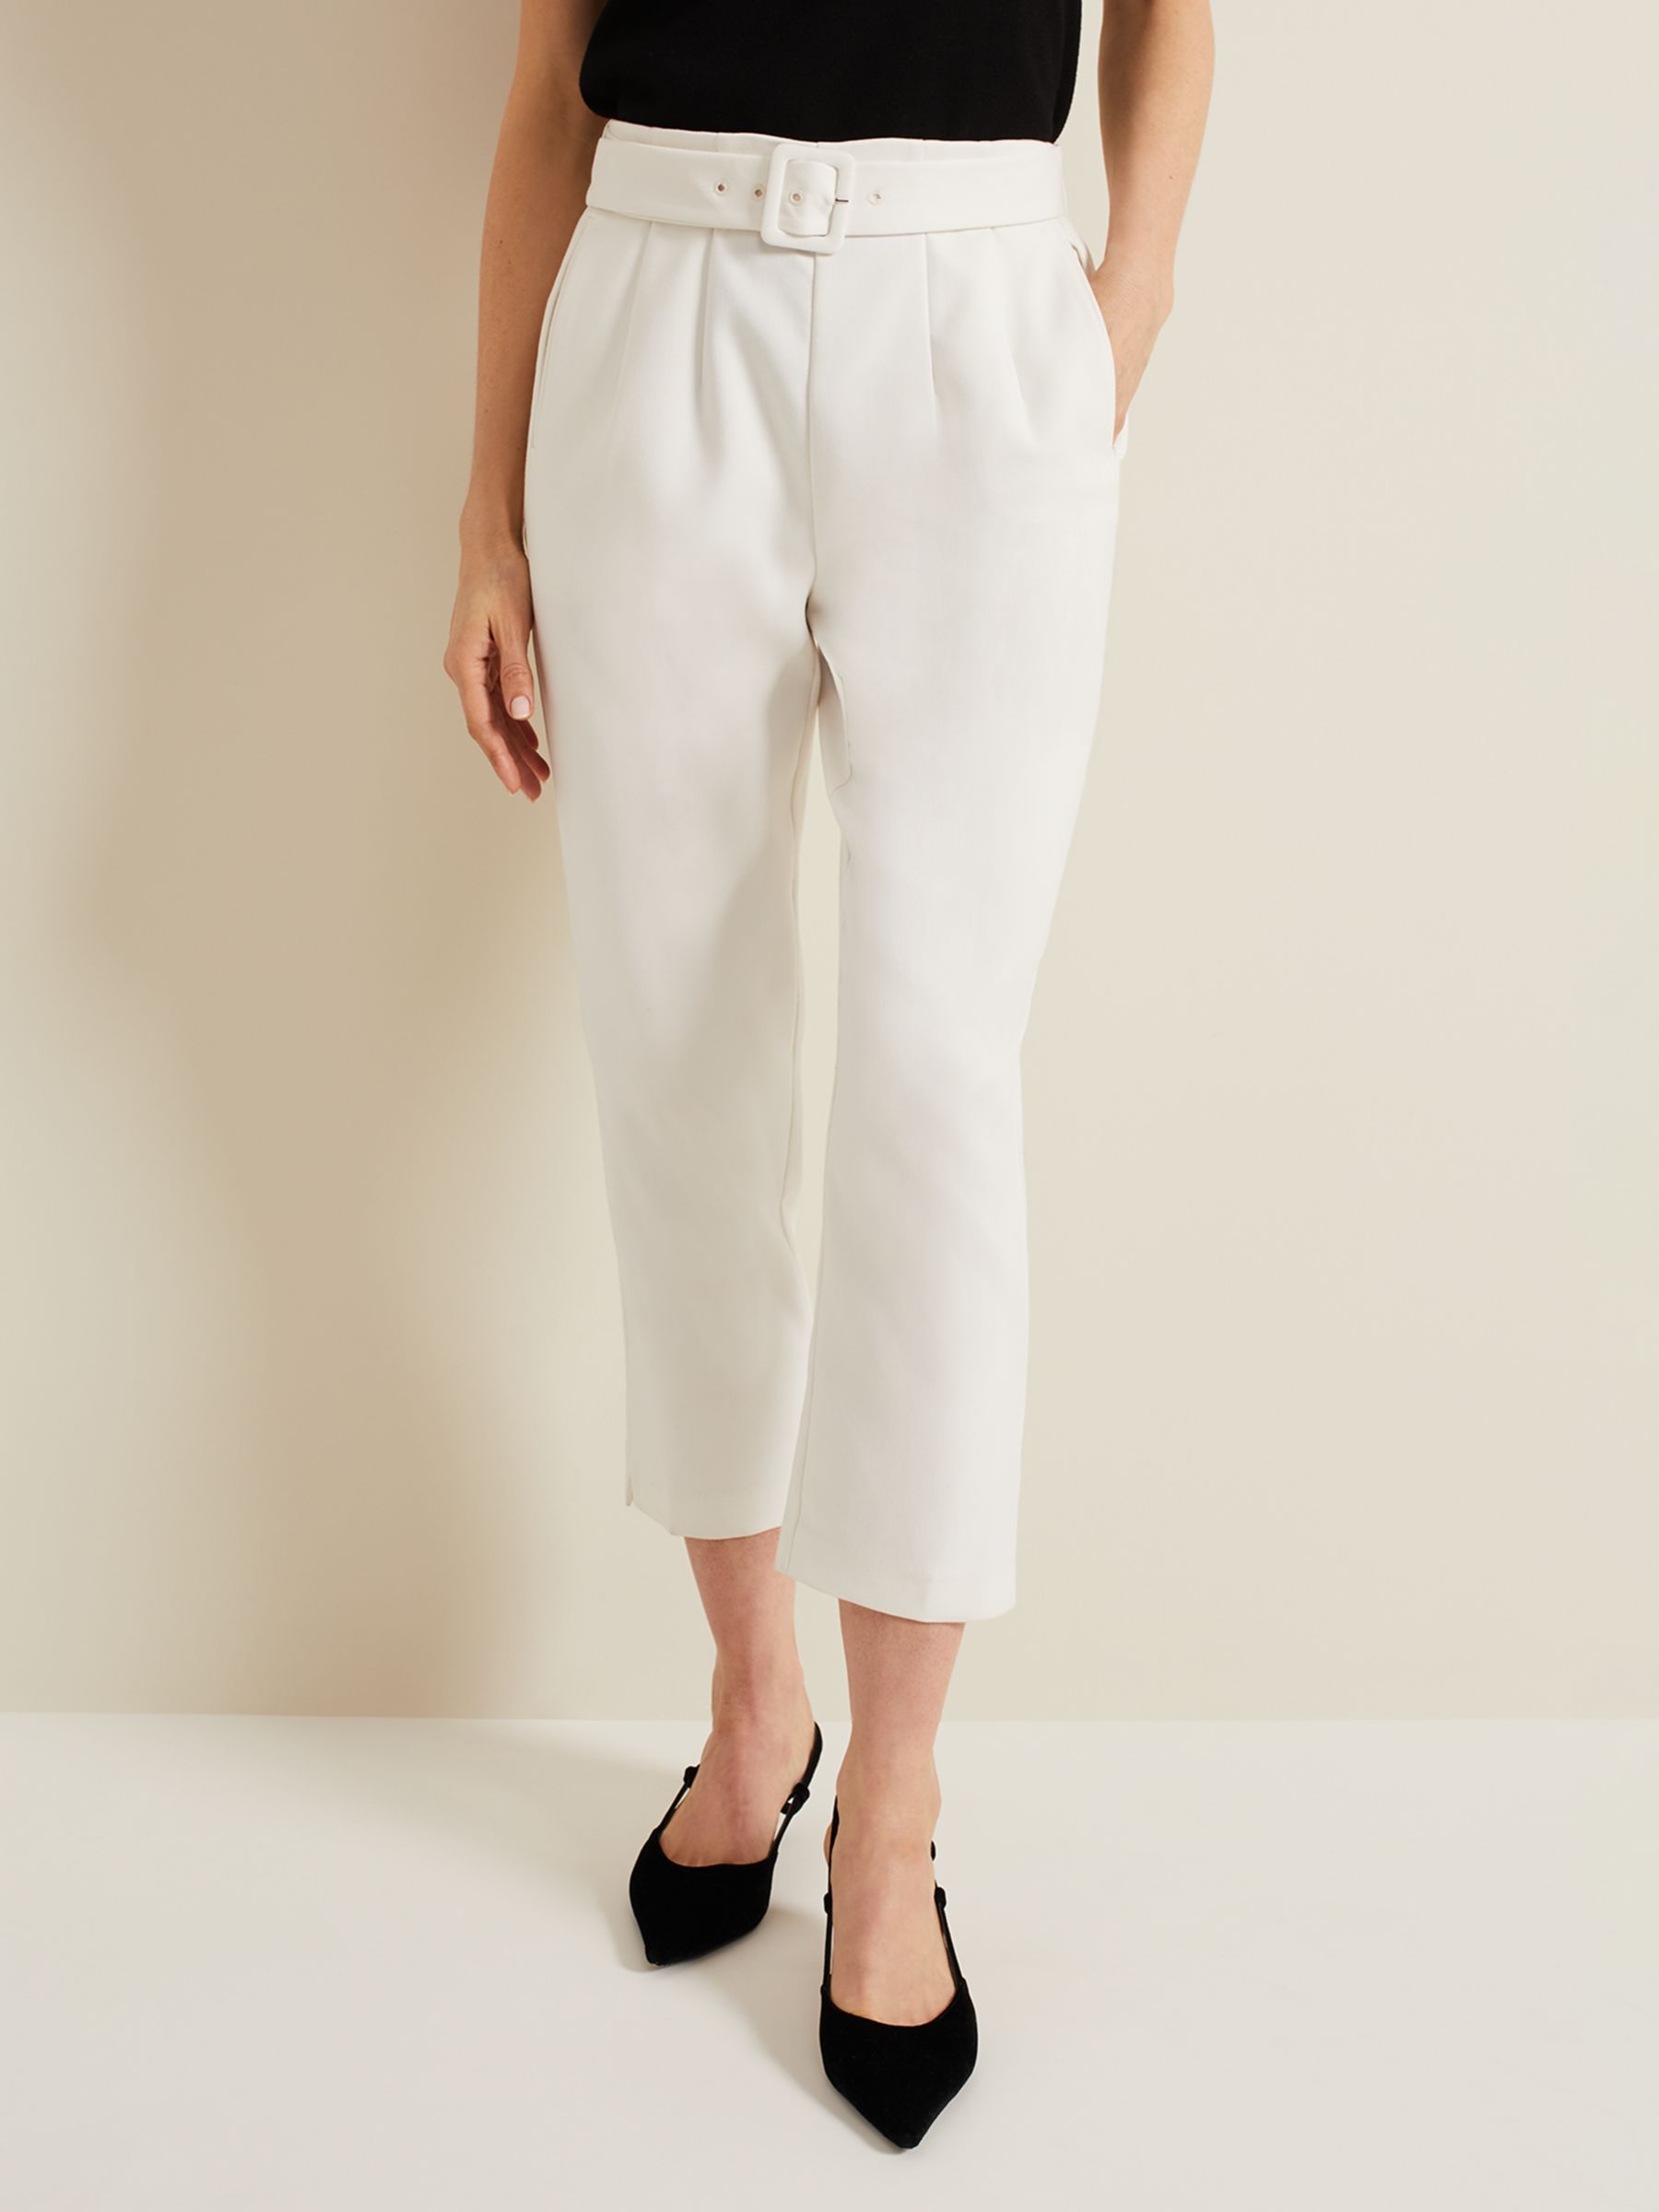 Phase Eight Gaia Tailored Cropped Trousers, Ivory, 8